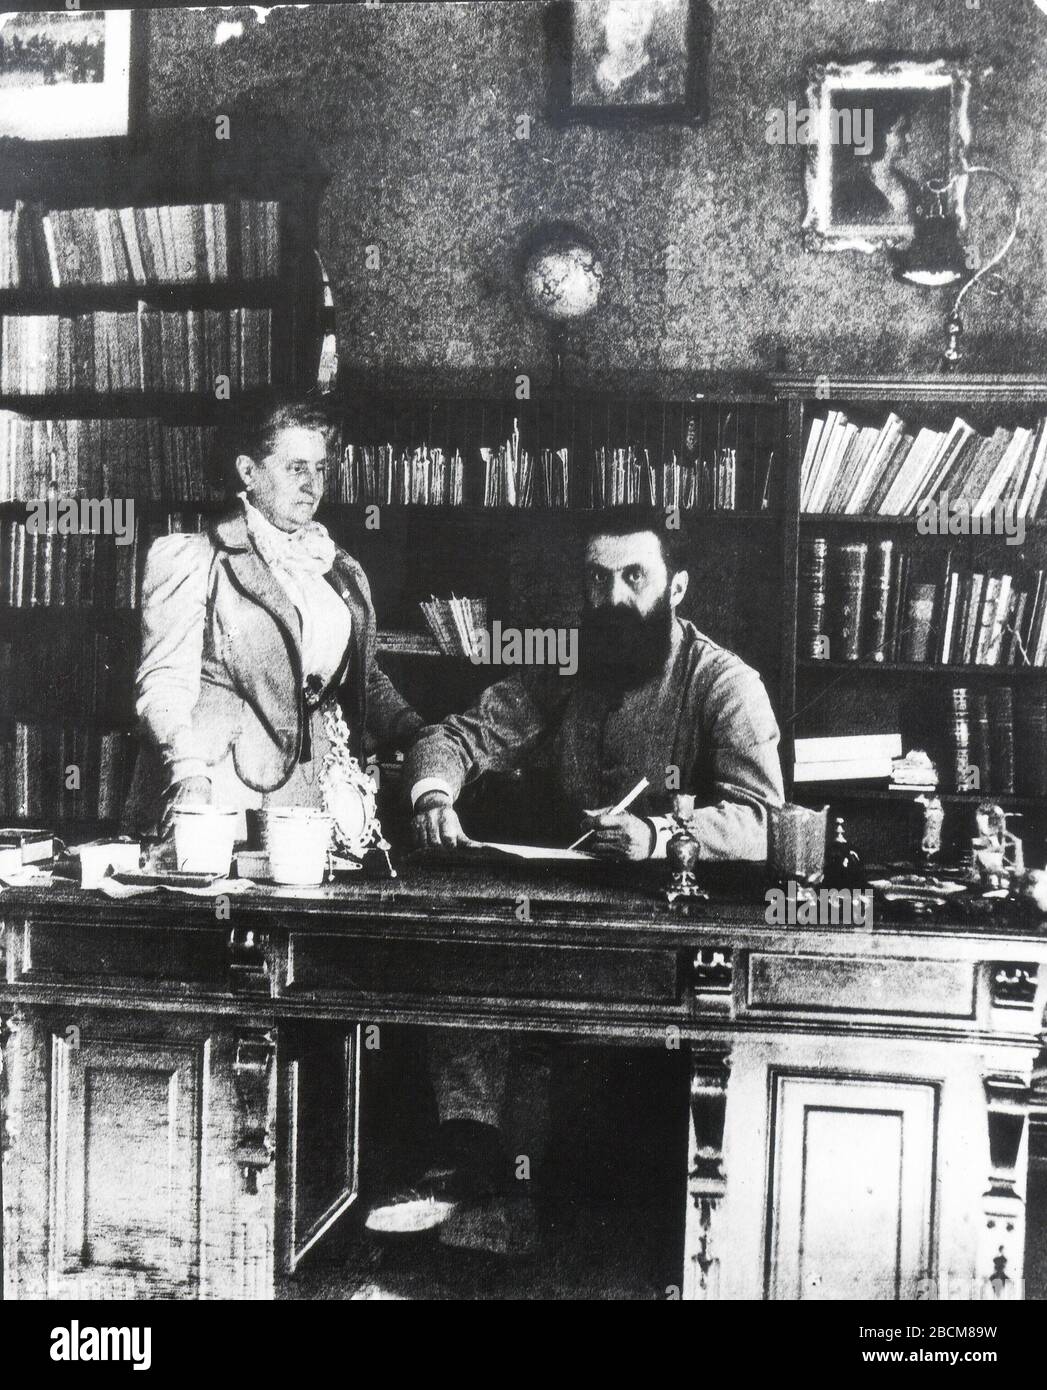 English Theodor Herzl In His Study With His Mother Janette Beside Him 1903 E I I I I U E O I E I I I I E U I N E O I U I U O I I C 1903 1 January 1903 This Is Available